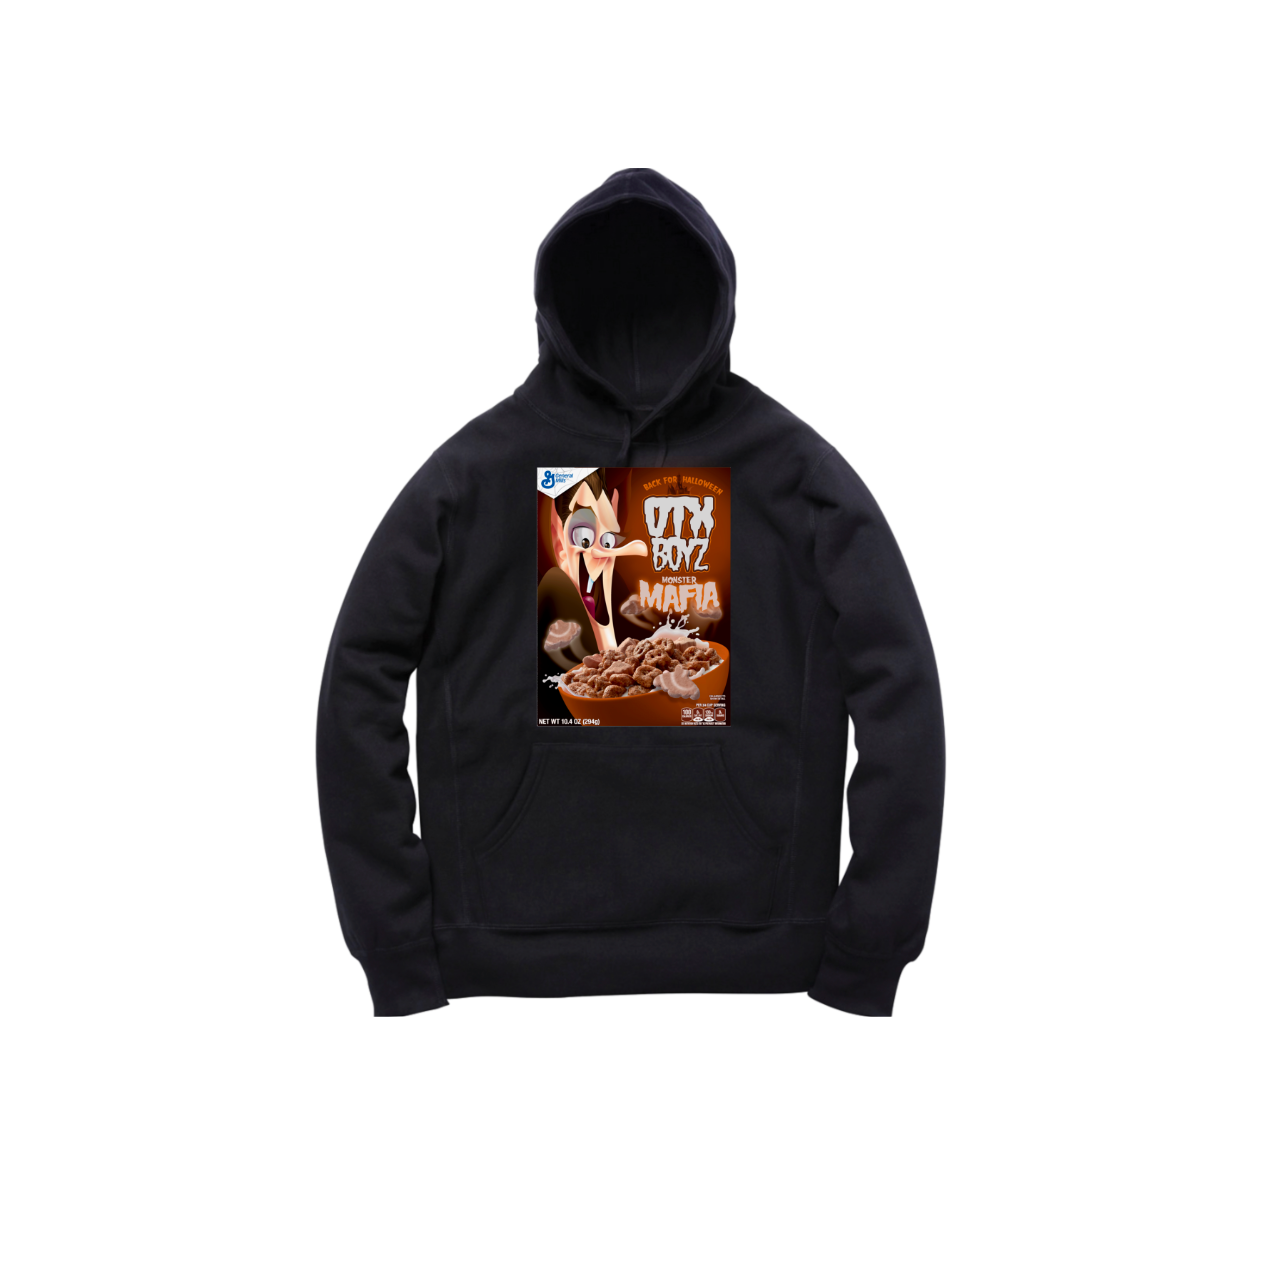 MINI COUNT CHOC TODDLER PULLOVER HOODY: BLACK